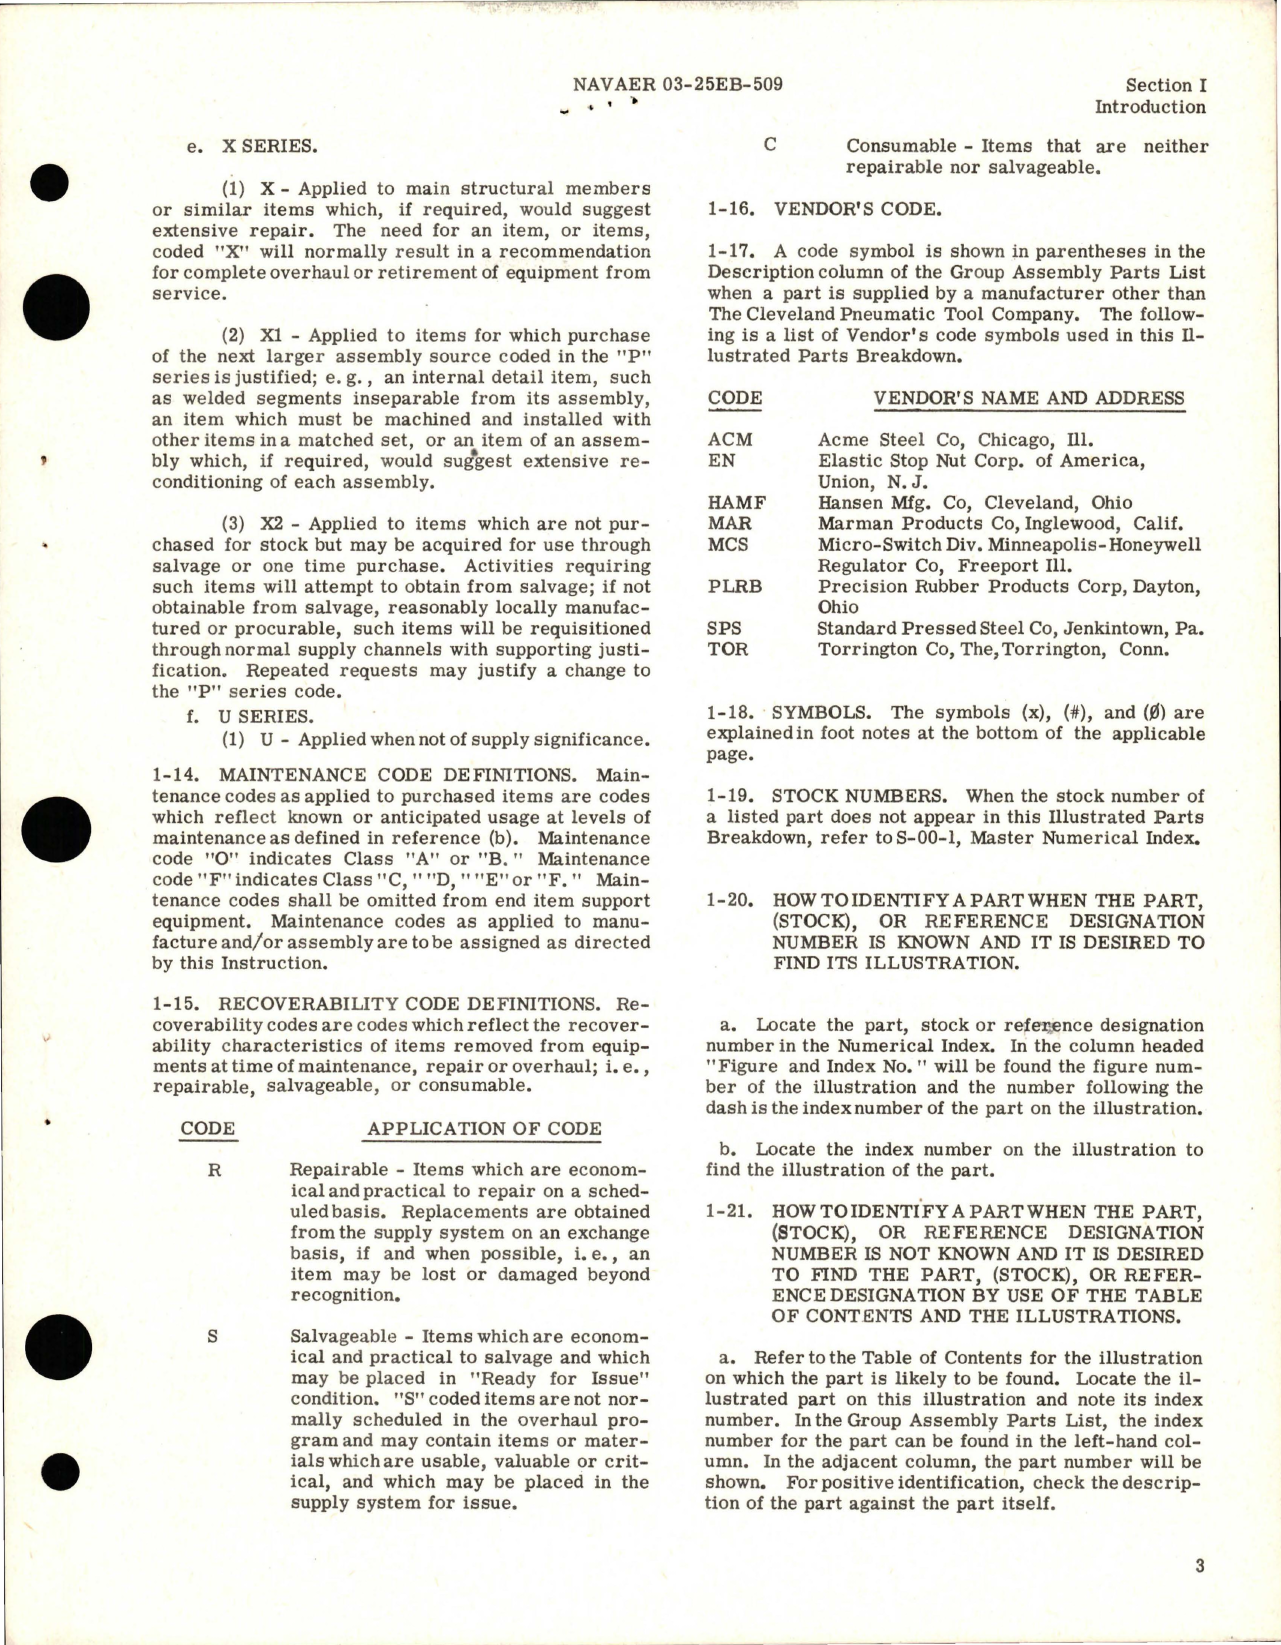 Sample page 5 from AirCorps Library document: Illustrated Parts Breakdown for Gear Assembly - Part 9684 